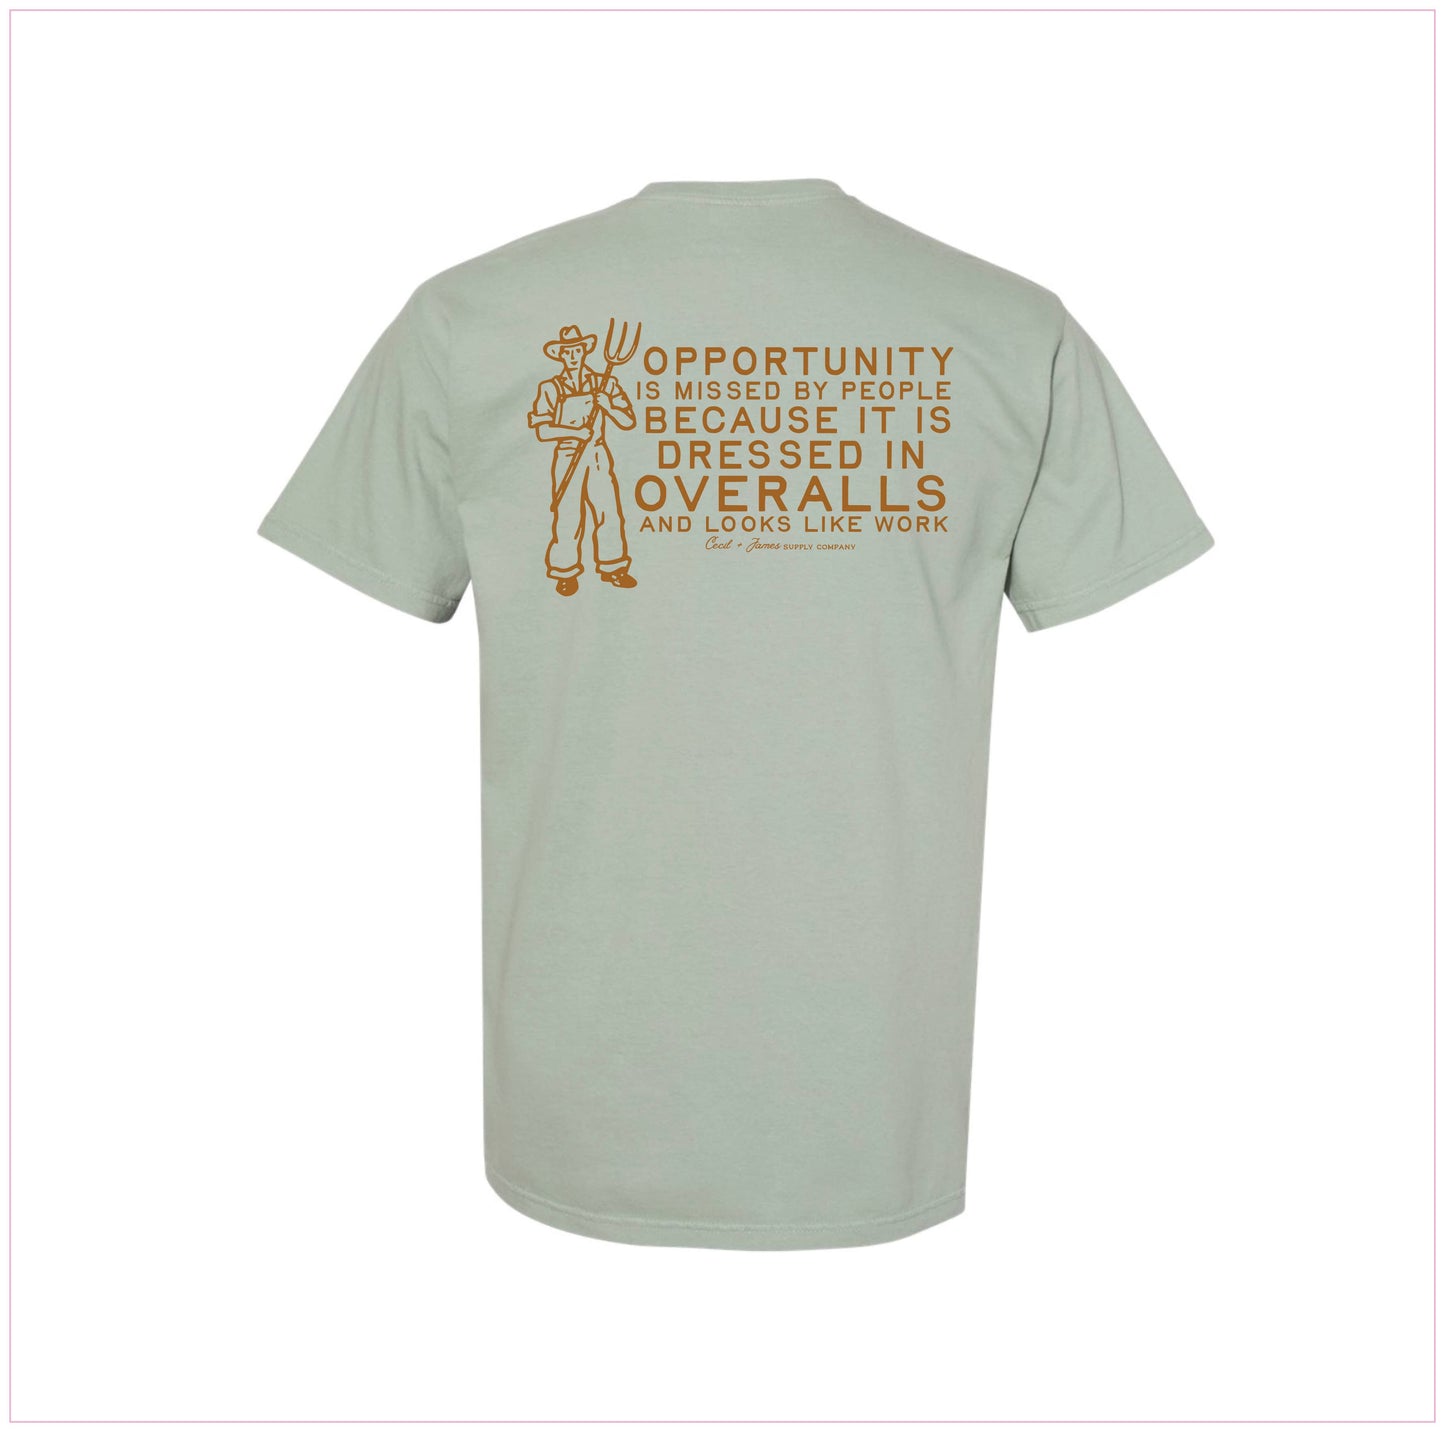 Opportunity and Overalls pocket T-shirt